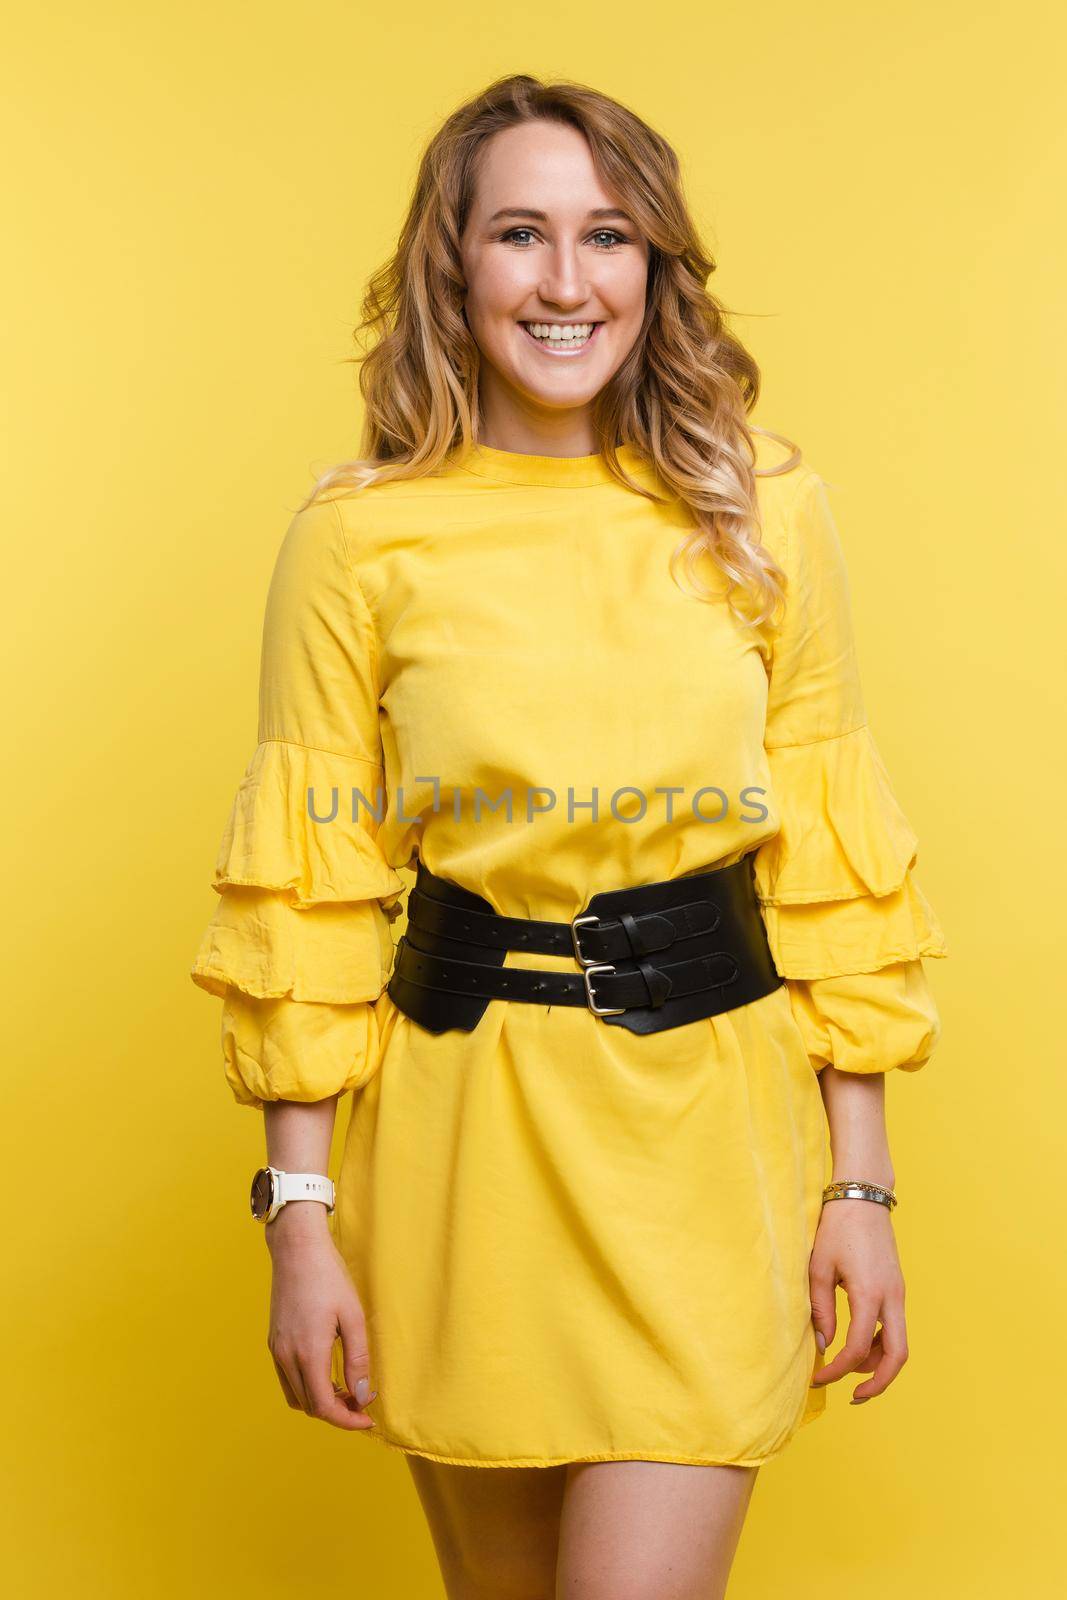 Studio portrait of fashionable brunette lady in white dress with flowers and beige heels posing with bent leg. Smiling at camera. holding skirt. Isolate on yellow background.